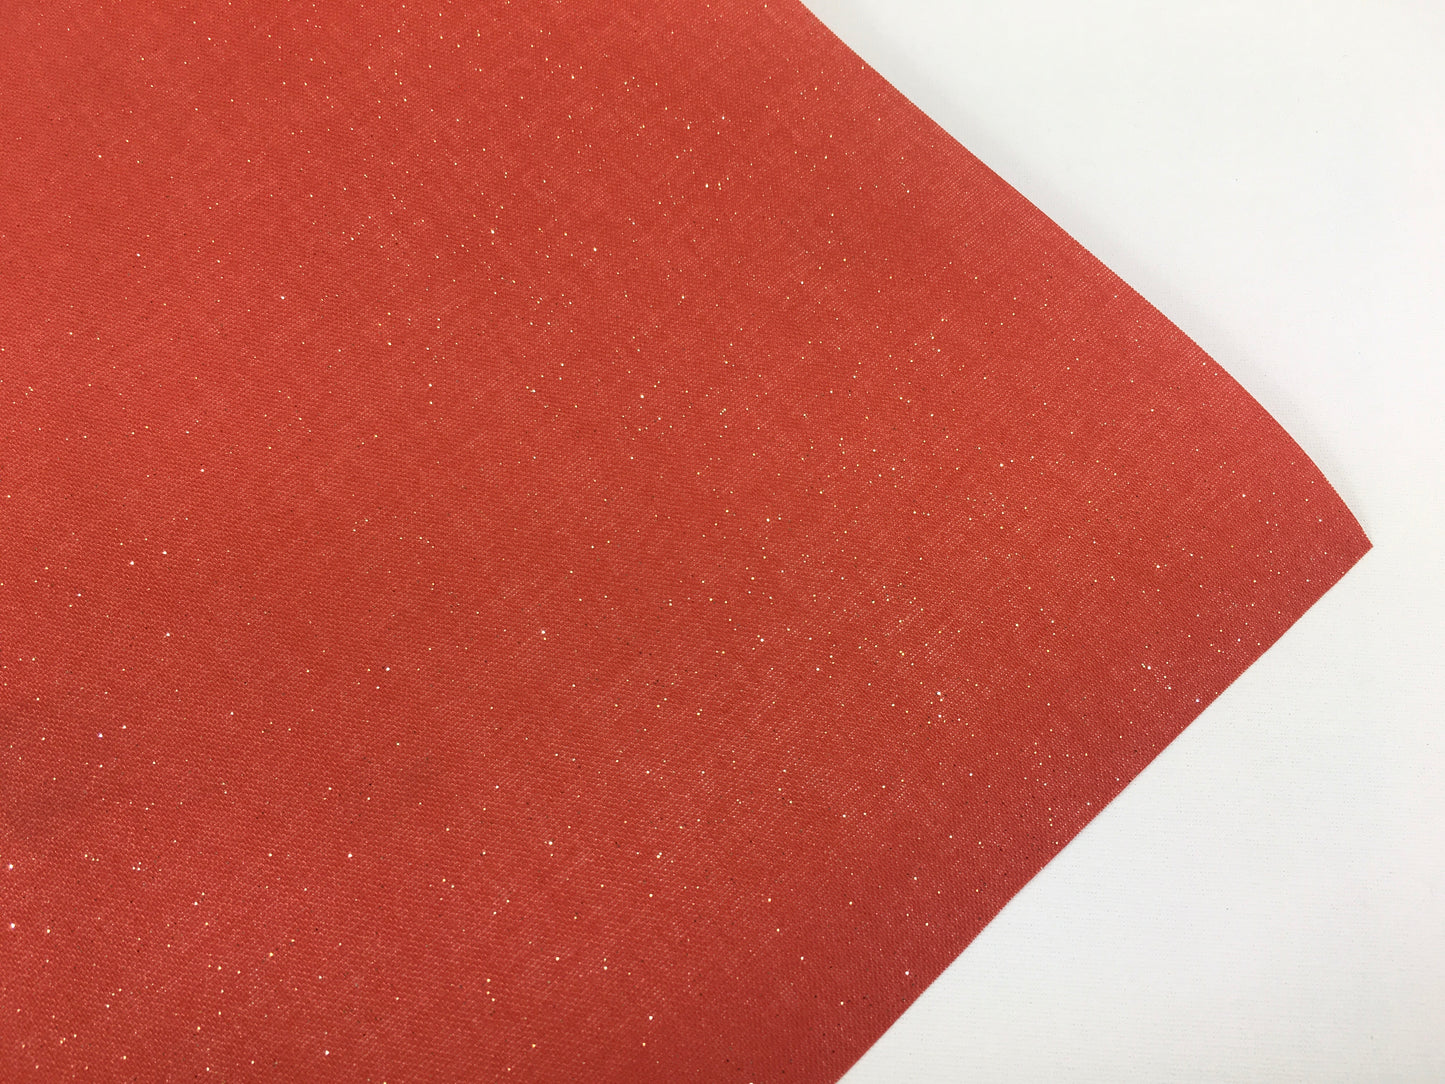 Sparkling Buckram- Durable bookbinding cloth with paper backing